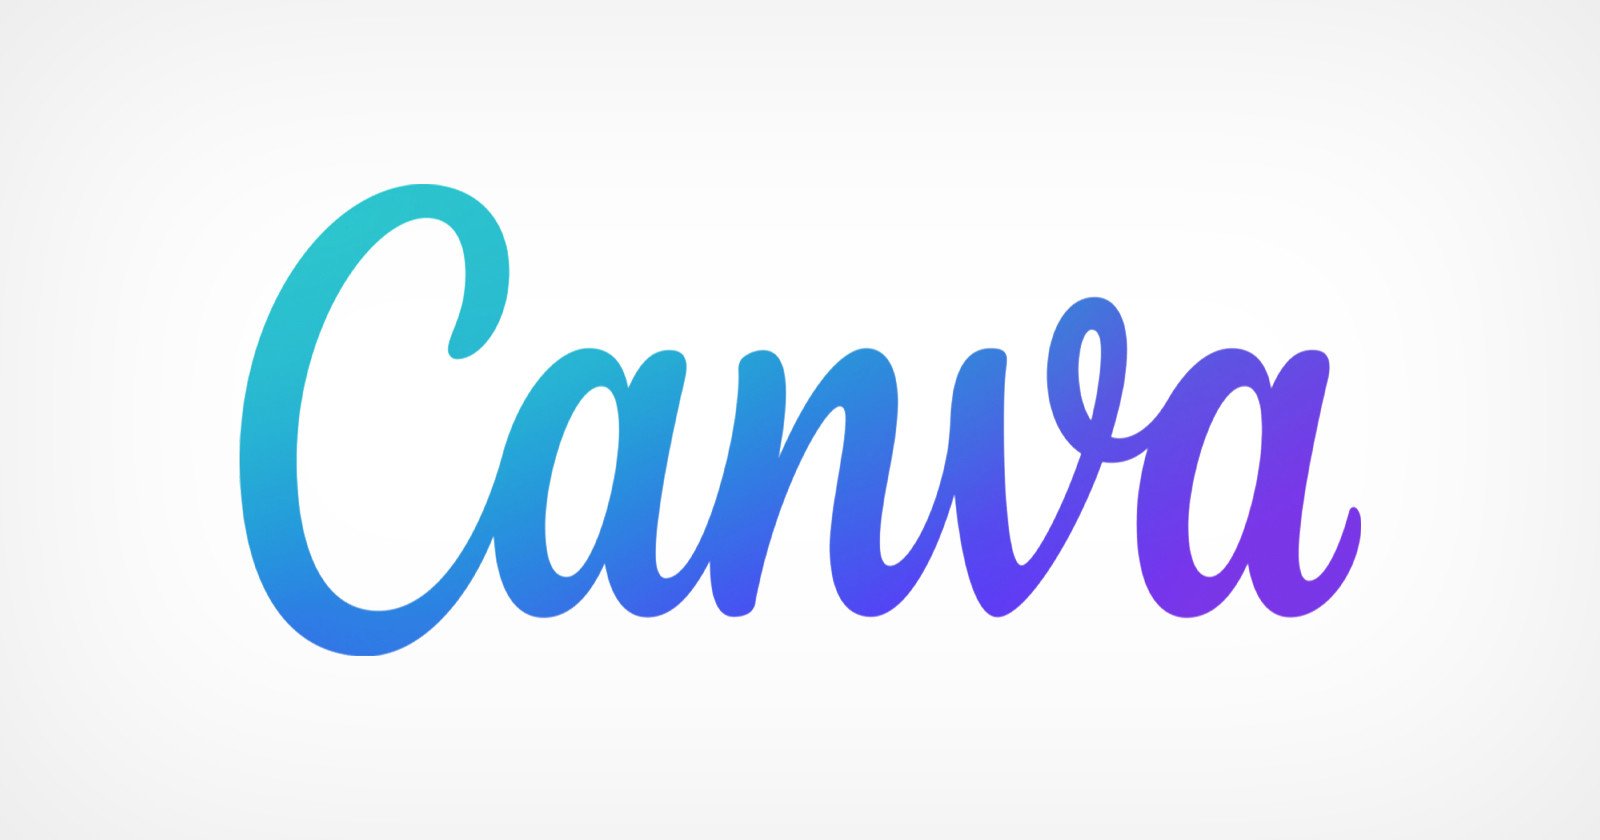  canva adds photo tool lets change 